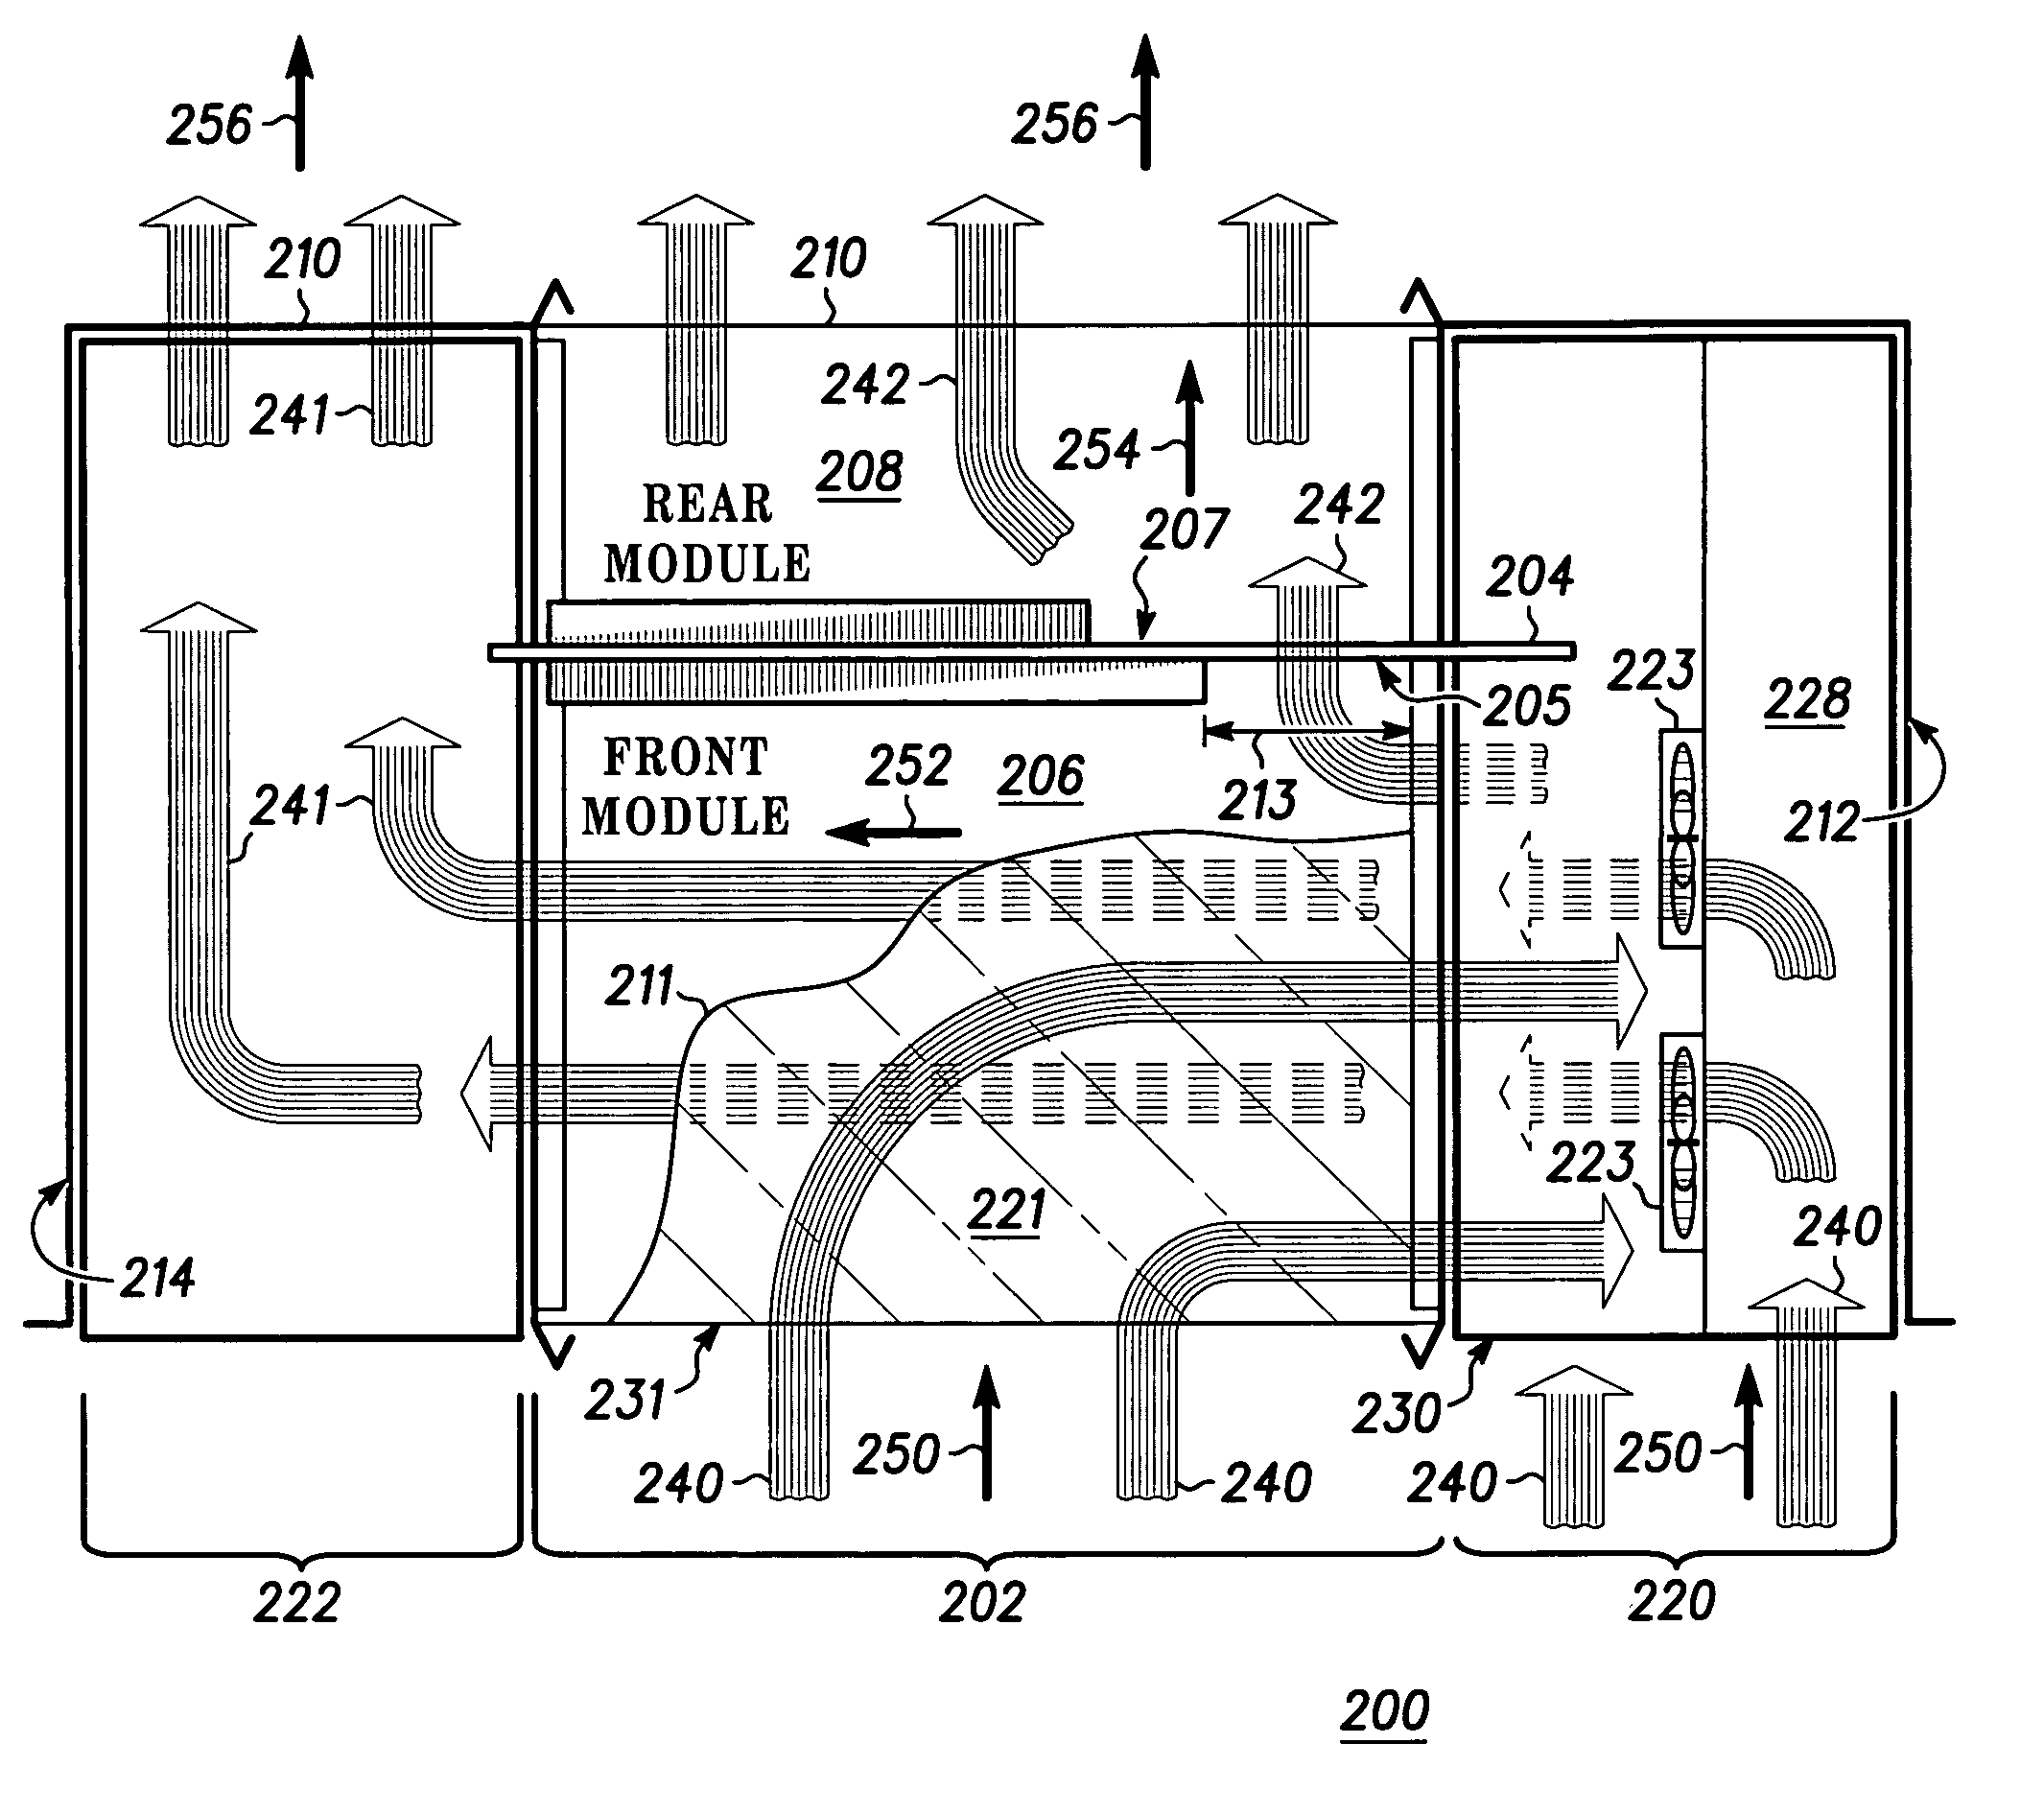 Method and apparatus for cooling a module portion